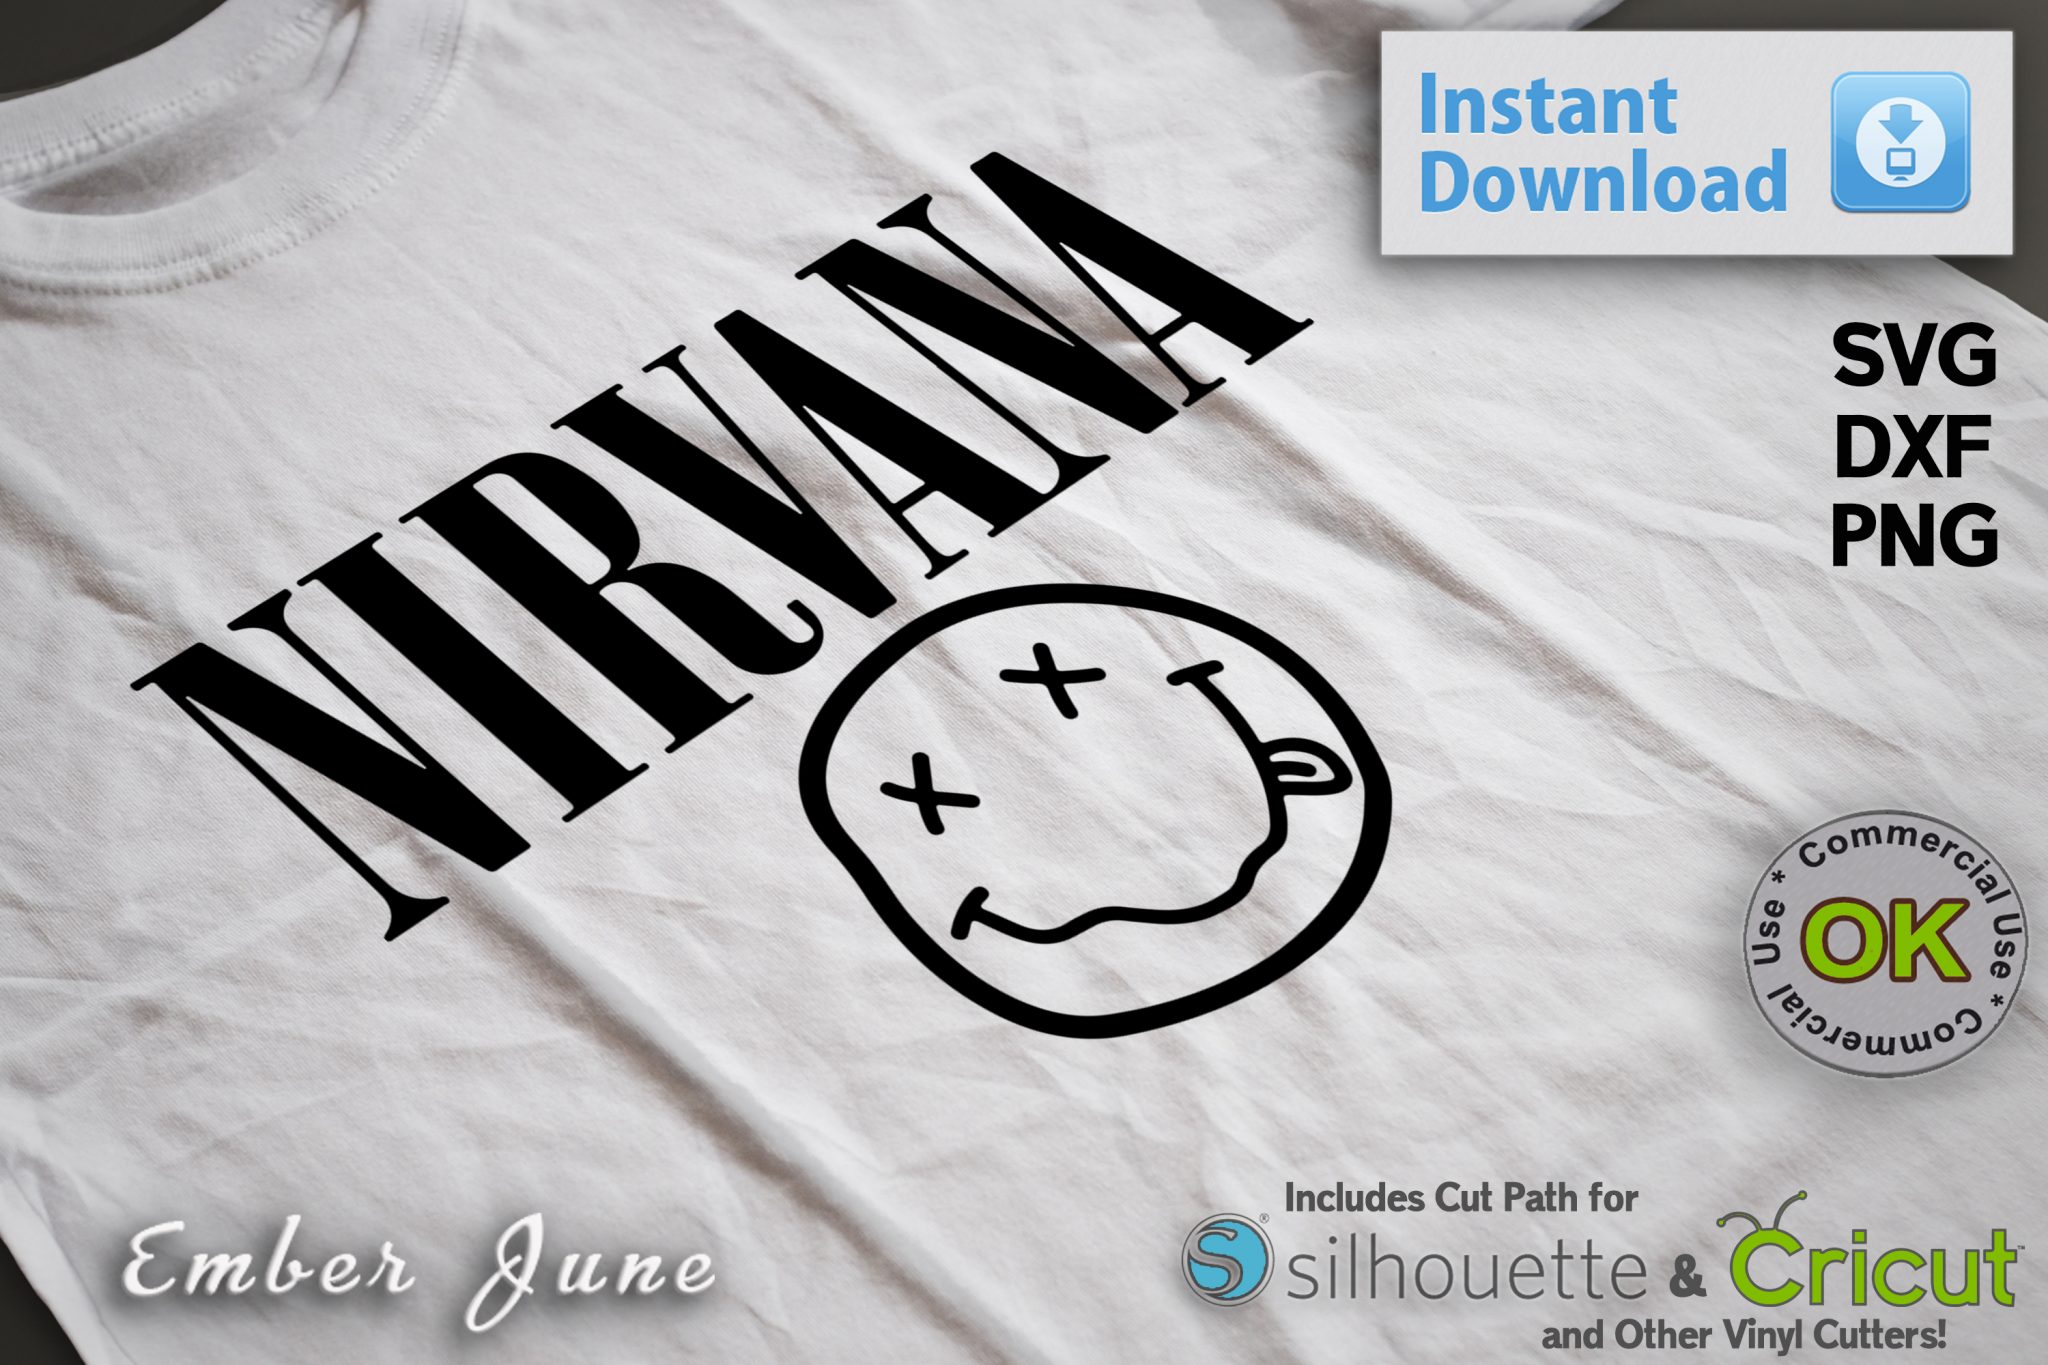 Download Nirvana Smiley Face Band Logo Svg Dxf Png Instant Digital Download Xetsy